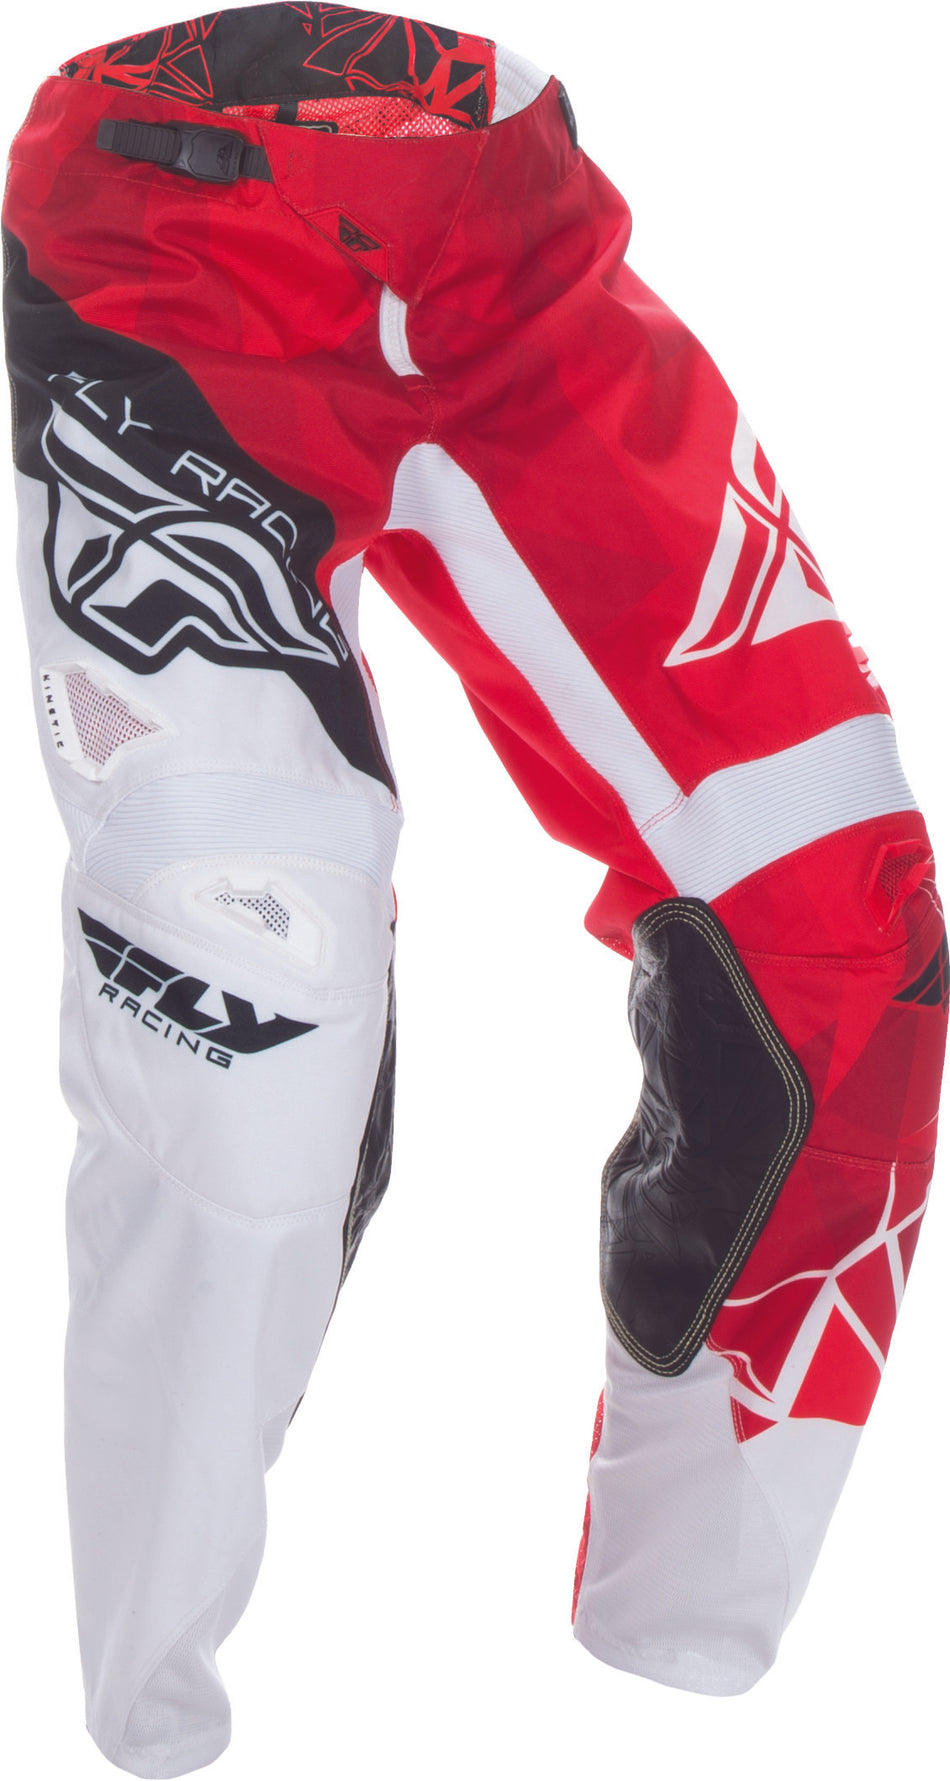 FLY RACING Kinetic Crux Pant Red/White Sz 20 370-53220